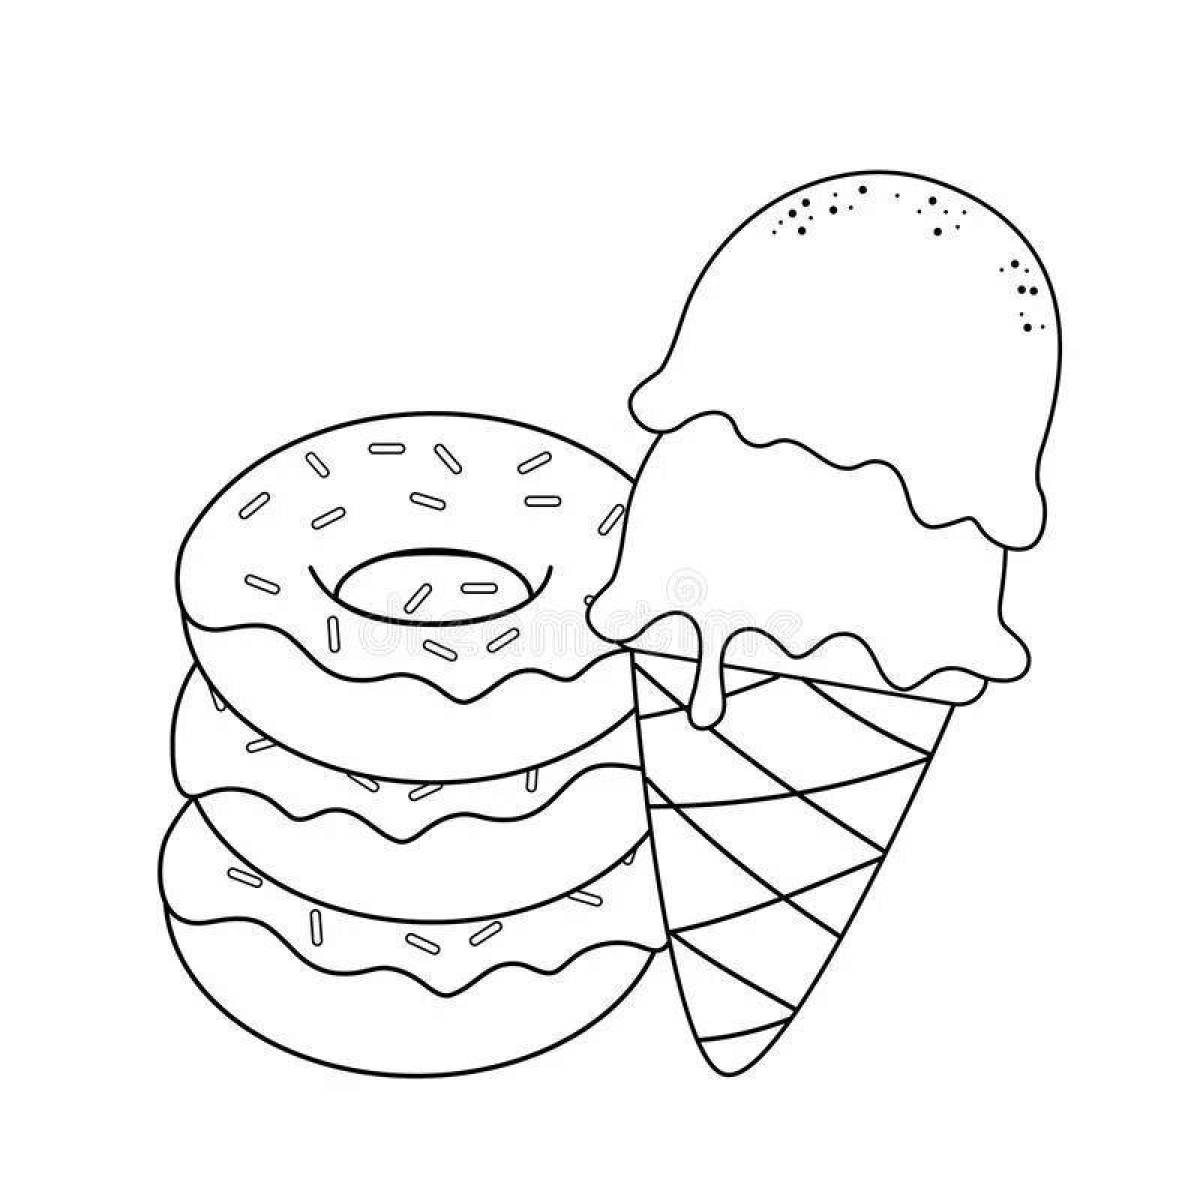 Coloring book teasing sweets